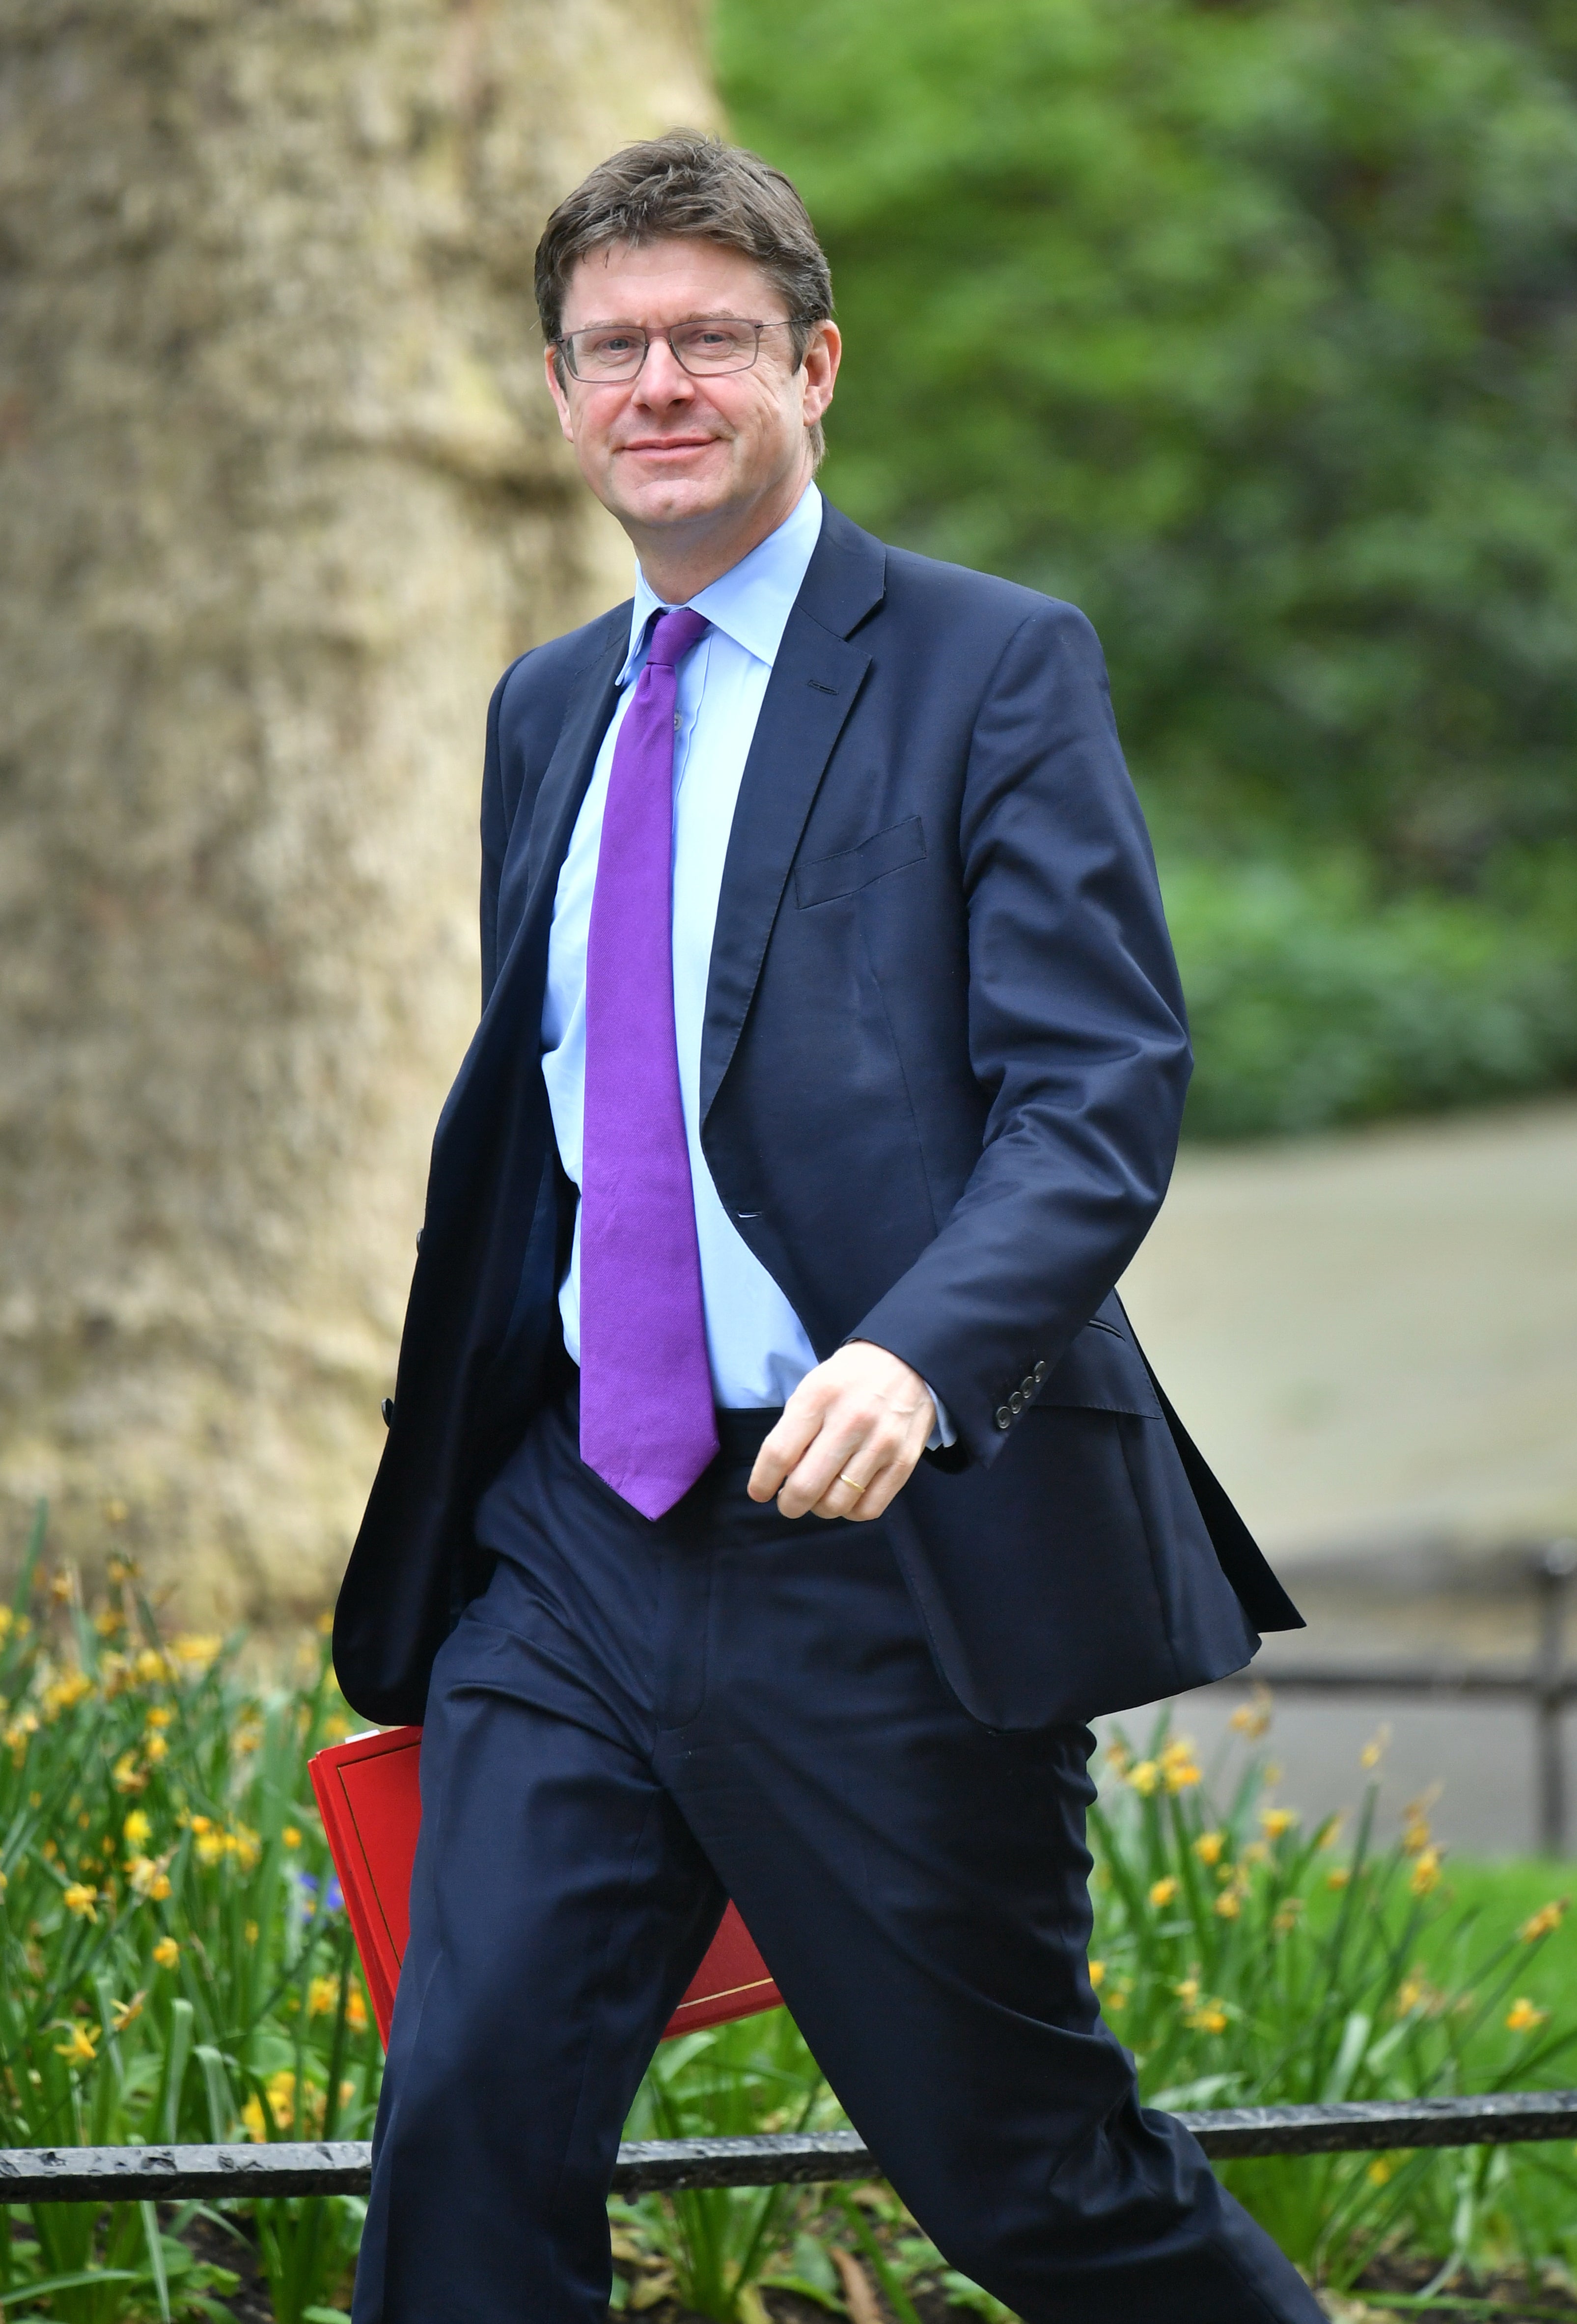 Greg Clark has been appointed as Levelling Up Secretary, replacing Michael Gove (Dominic Lipinski/PA)